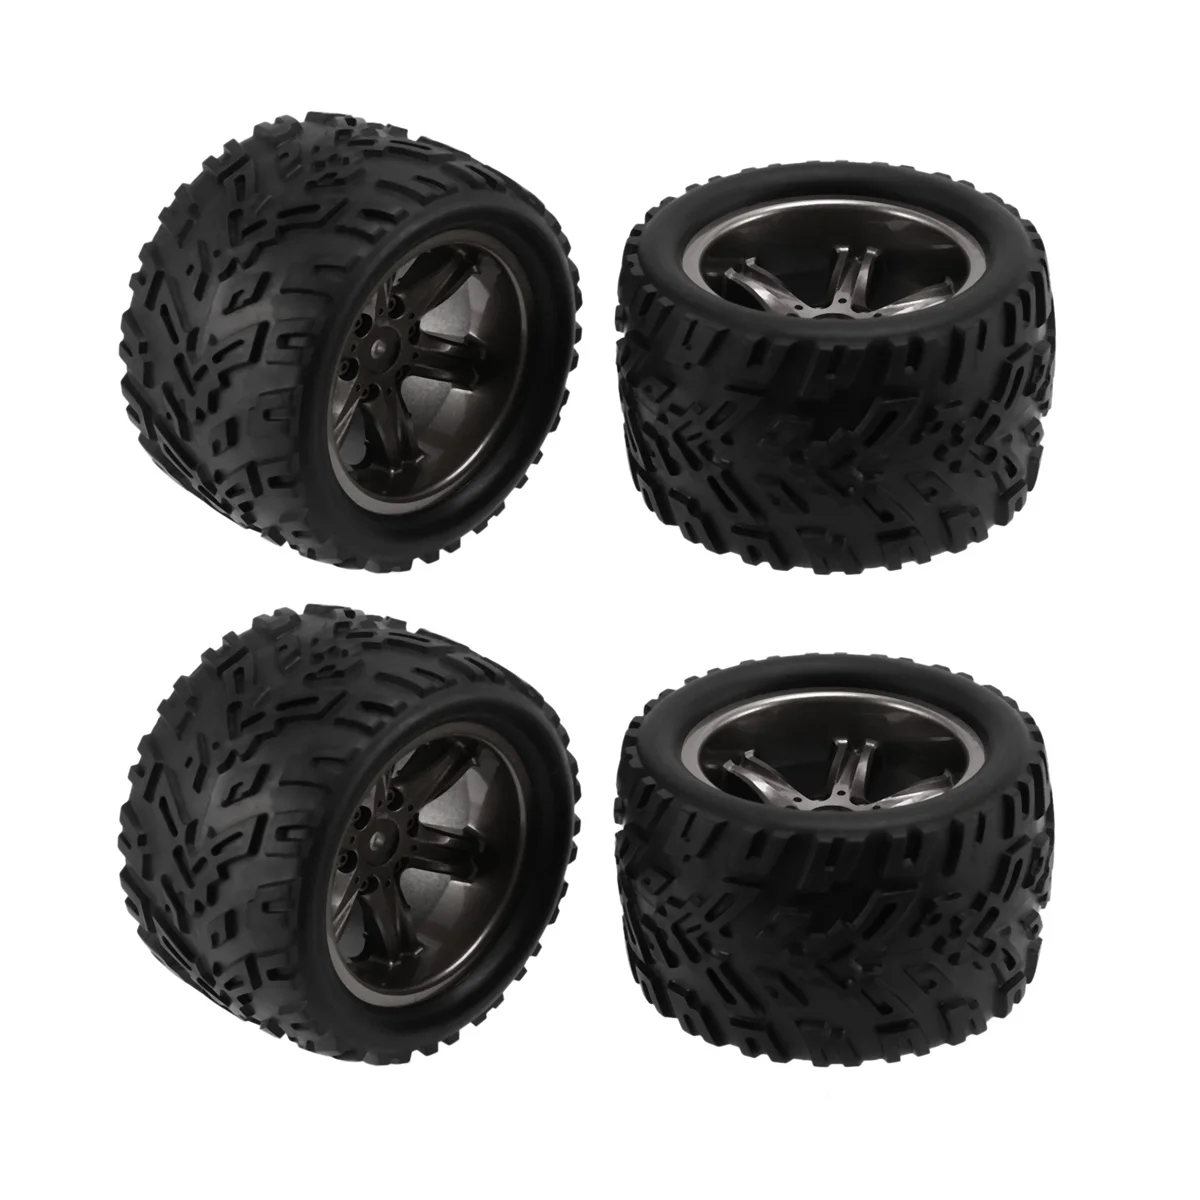 4Pcs Tires Tyre Wheel for XINLEHONG 9125 9116 X9115 X9116 GPTOYS S911 S912 1/12 RC Car Spare Parts Upgrade Accessories